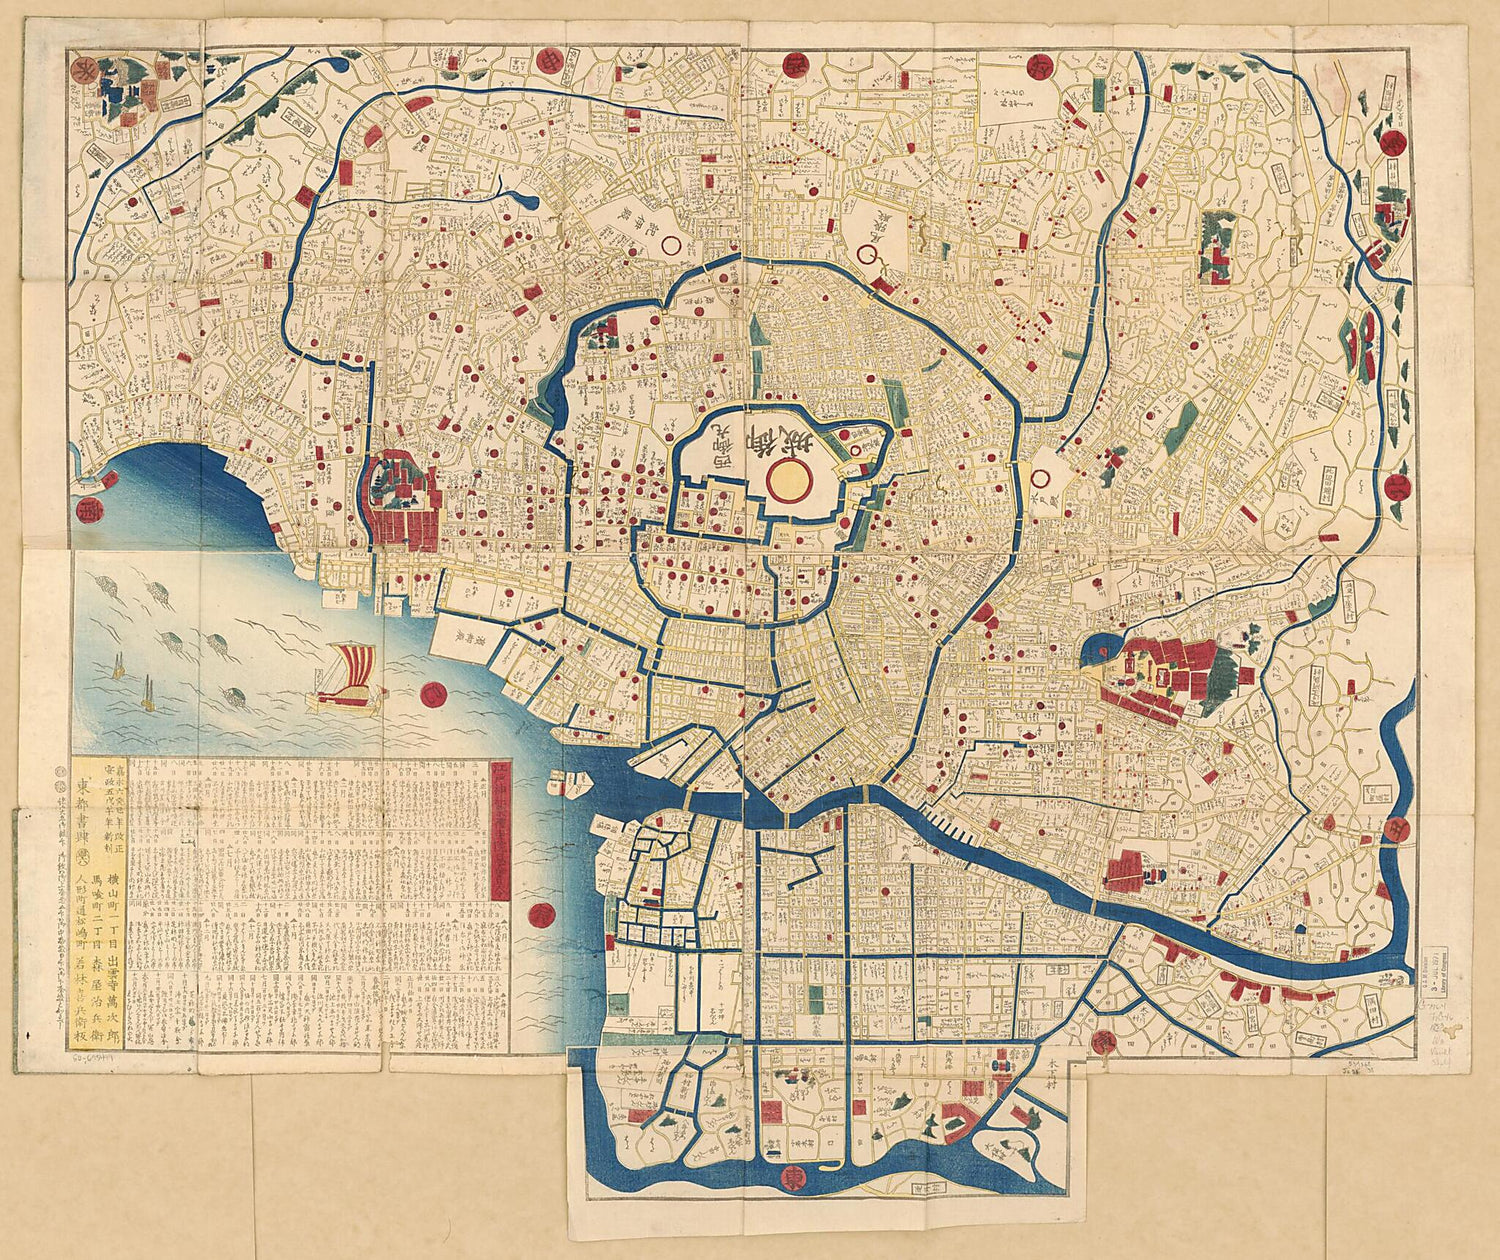 This old map of Enju Oedo Ezu (延壽御江戶繪圖 /) from 1853 was created by Kih Wakabayashi in 1853